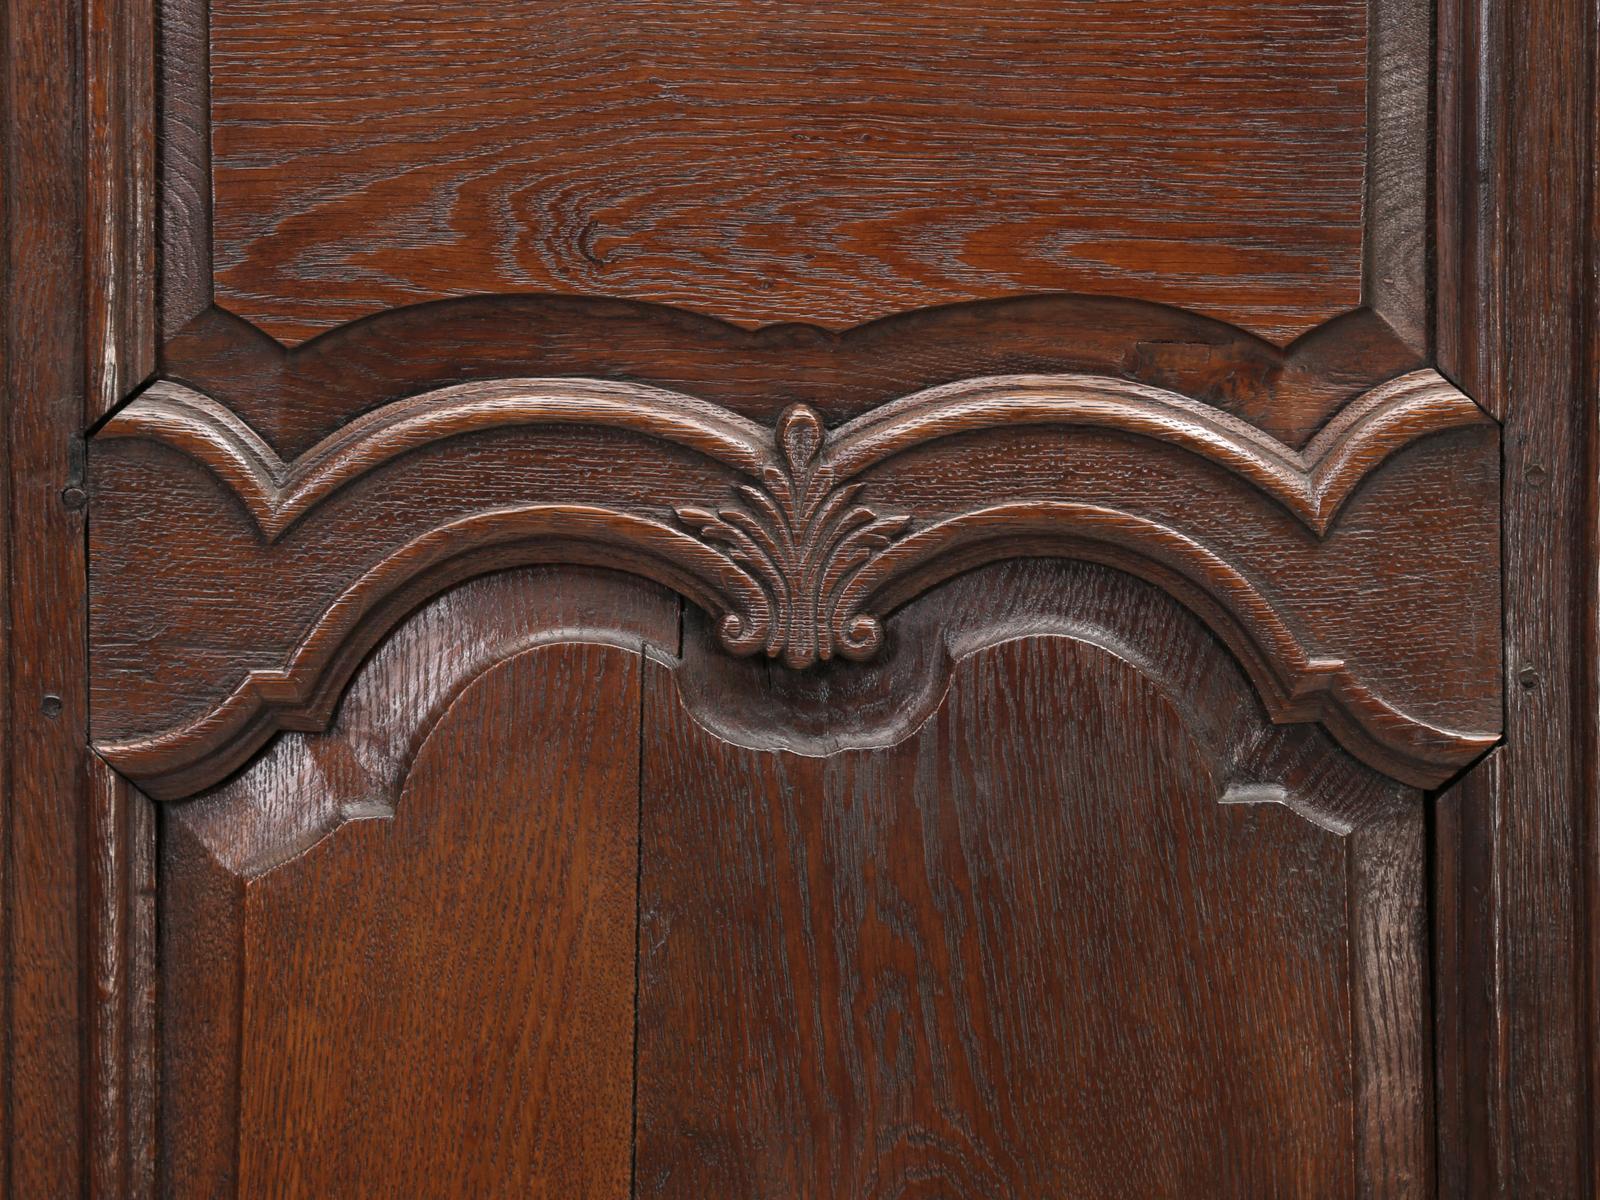 Mid-18th Century Antique Pair of French Oak Bonnetiere's, Amroires or Cupboards from the 1700s